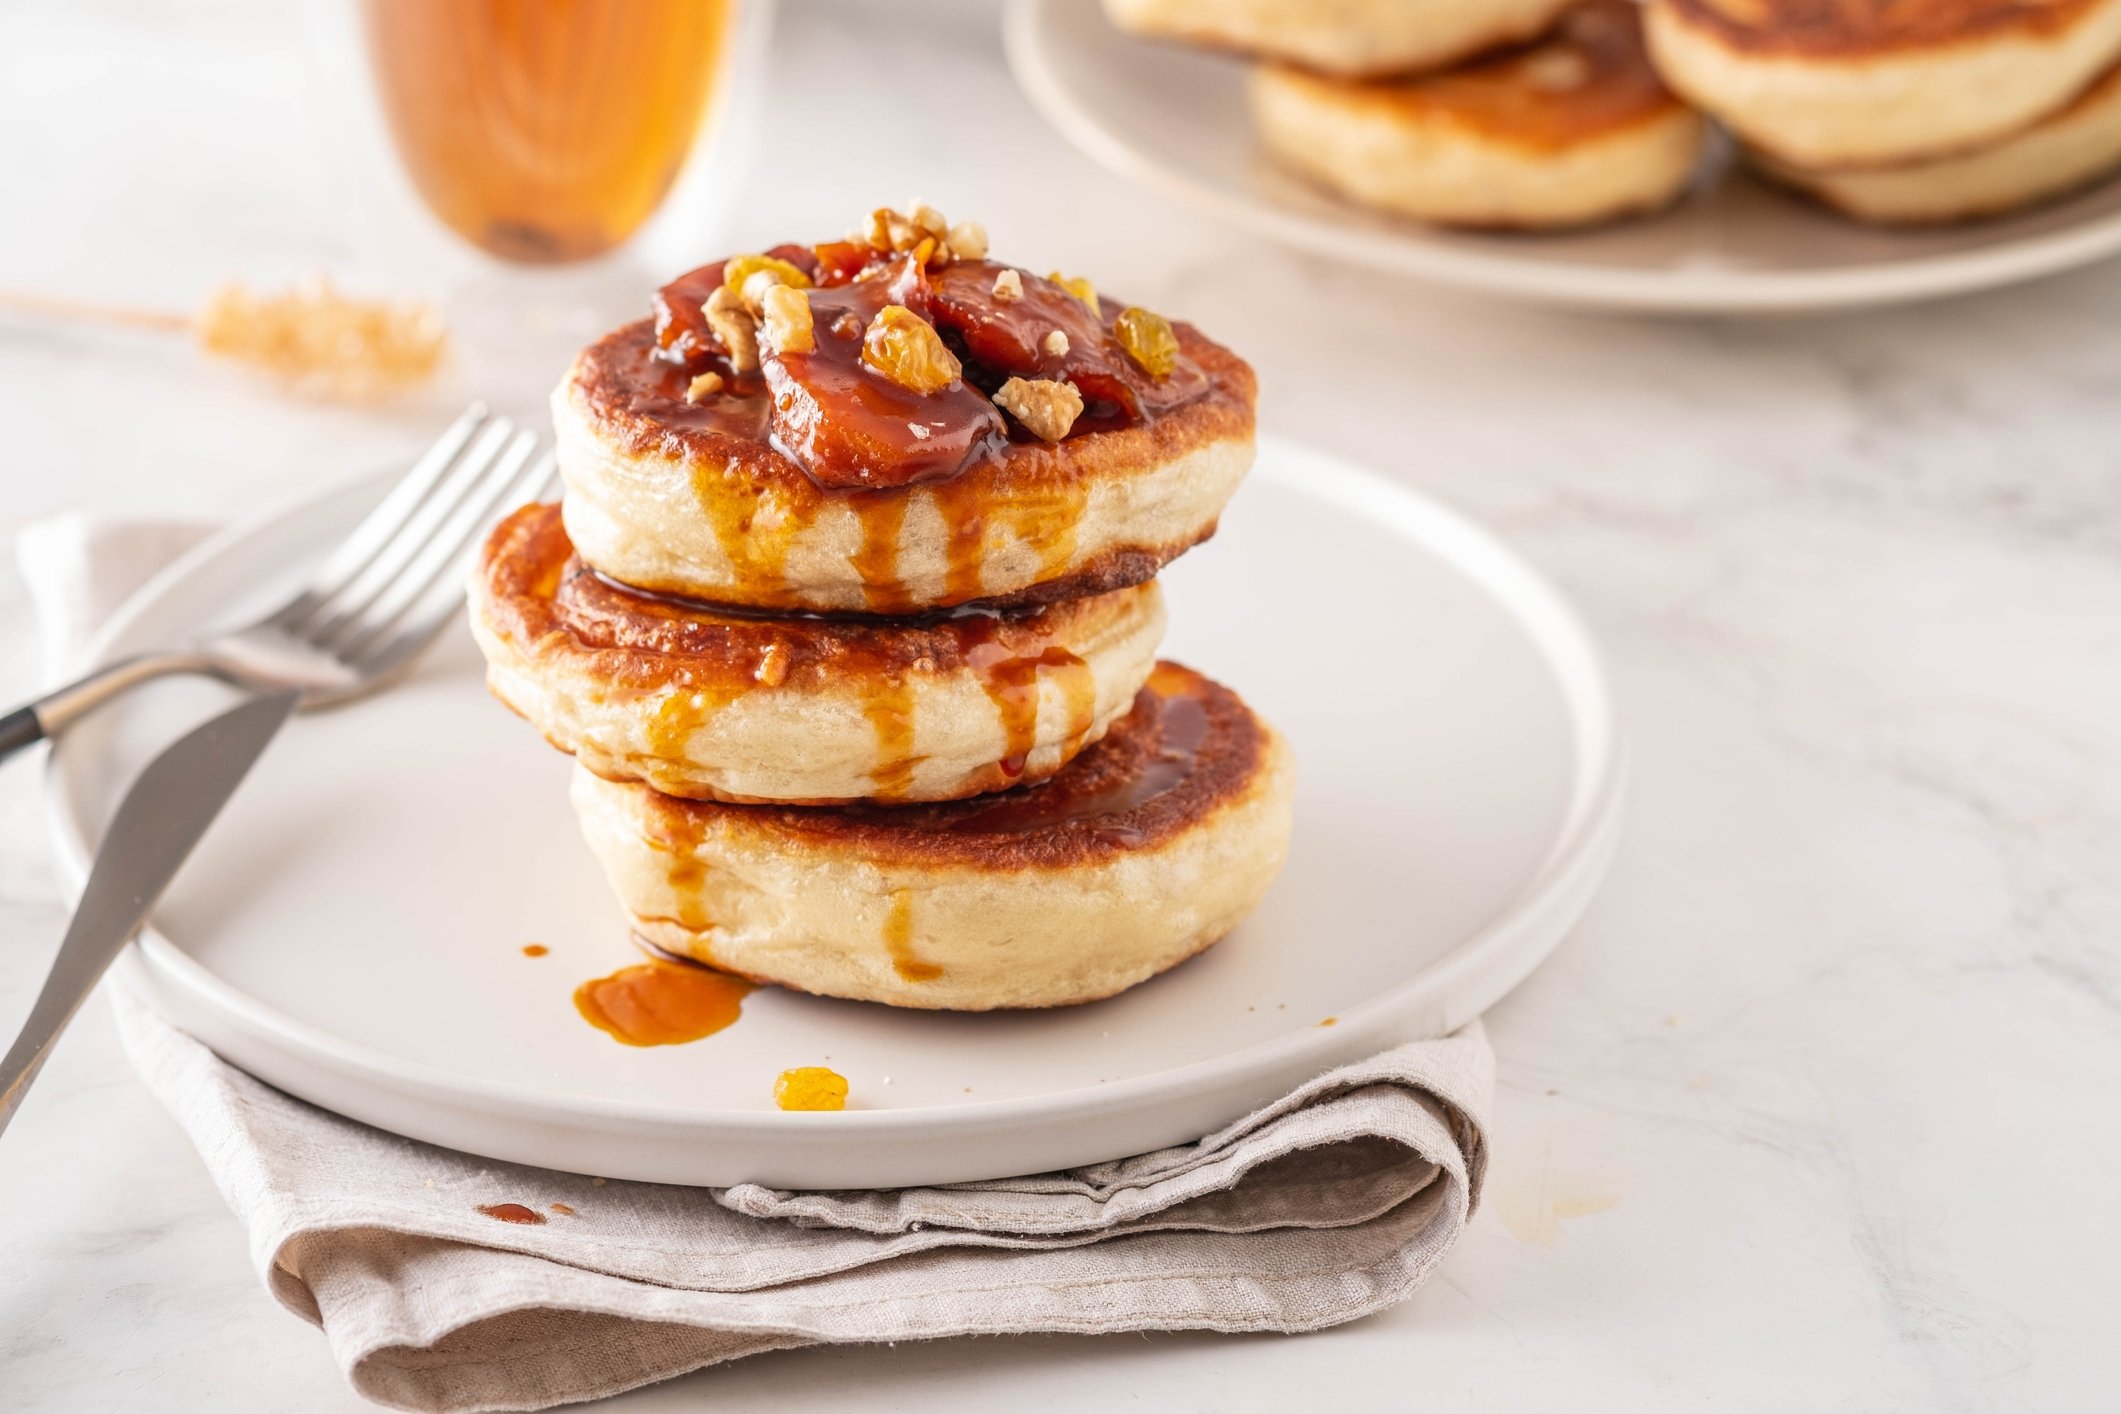 Apples, honey and cinnamon could be a great addition to tiny Dutch pancakes. (iStock Photo)